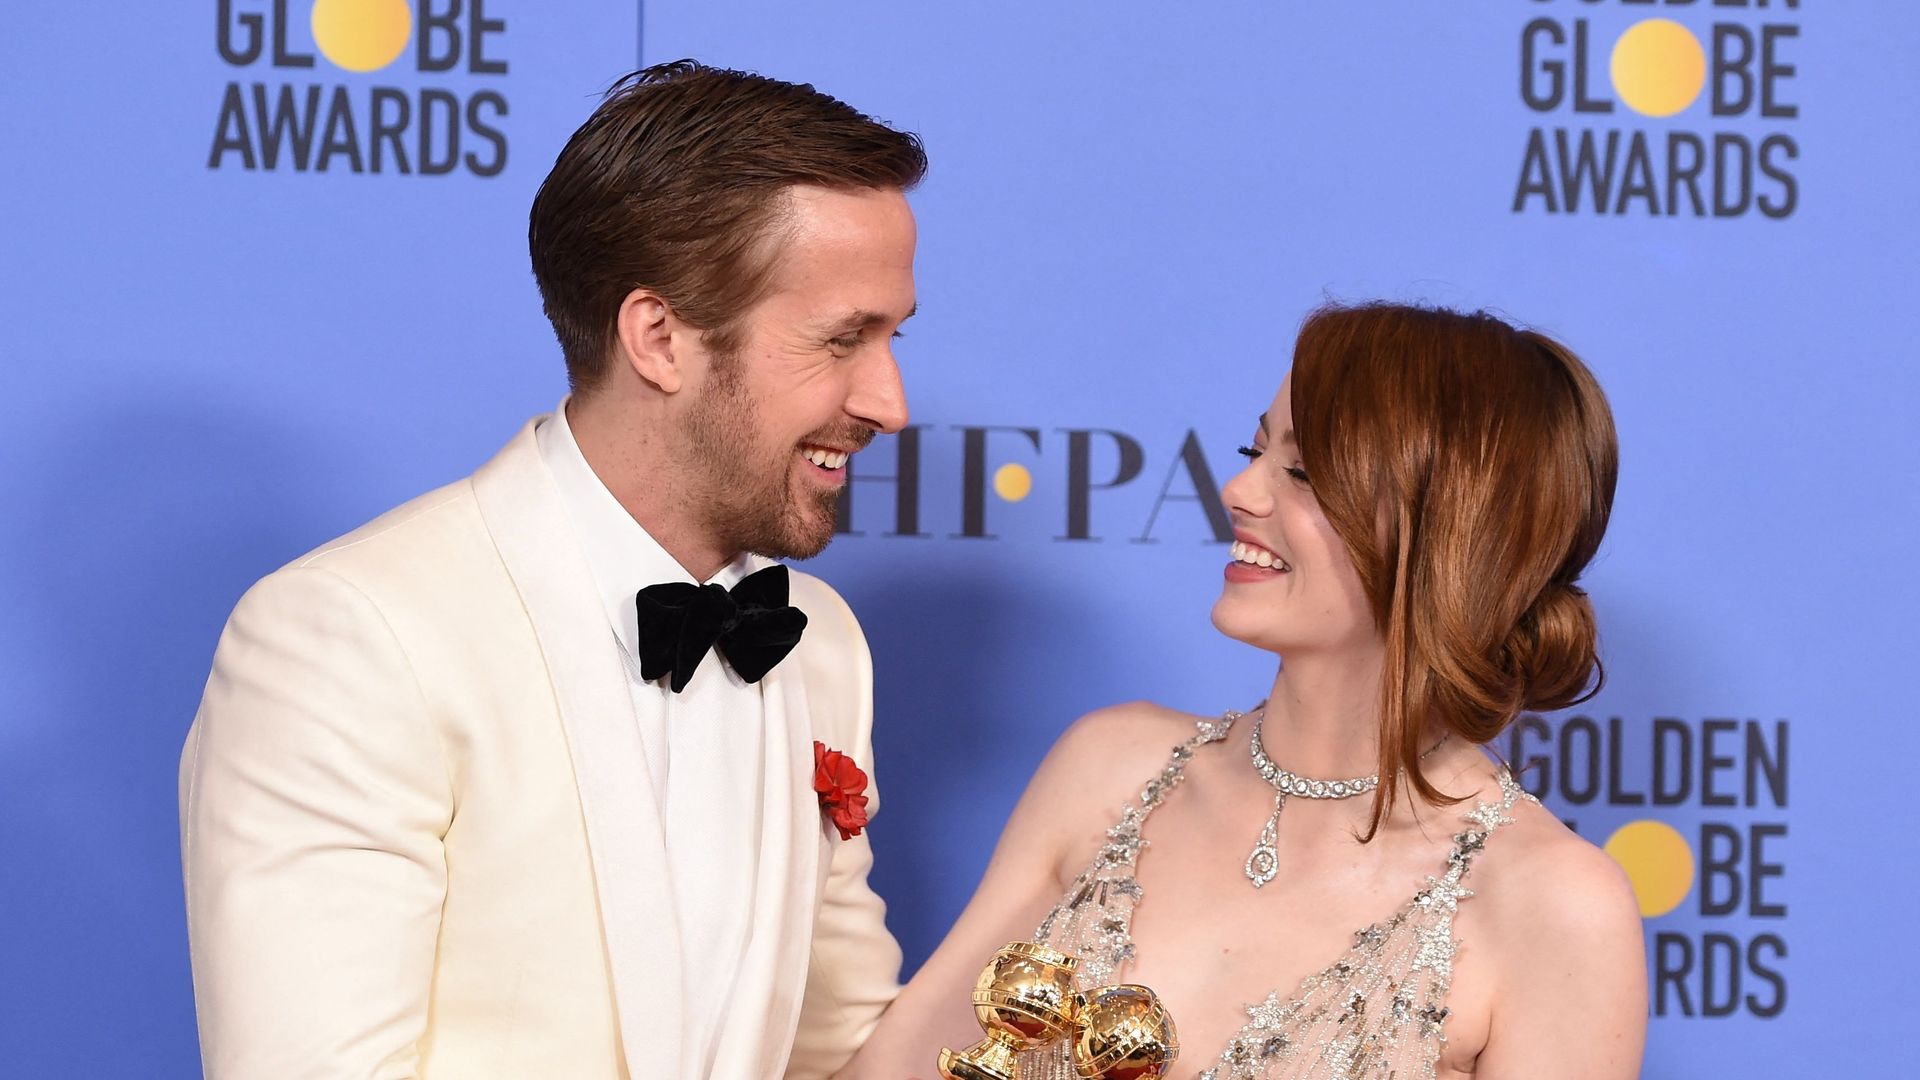 Ryan Gosling and Emma Stone pose in the press room at the 74th Annual Golden Globe Awards held at the Beverly Hilton Hotel on January 8, 2017